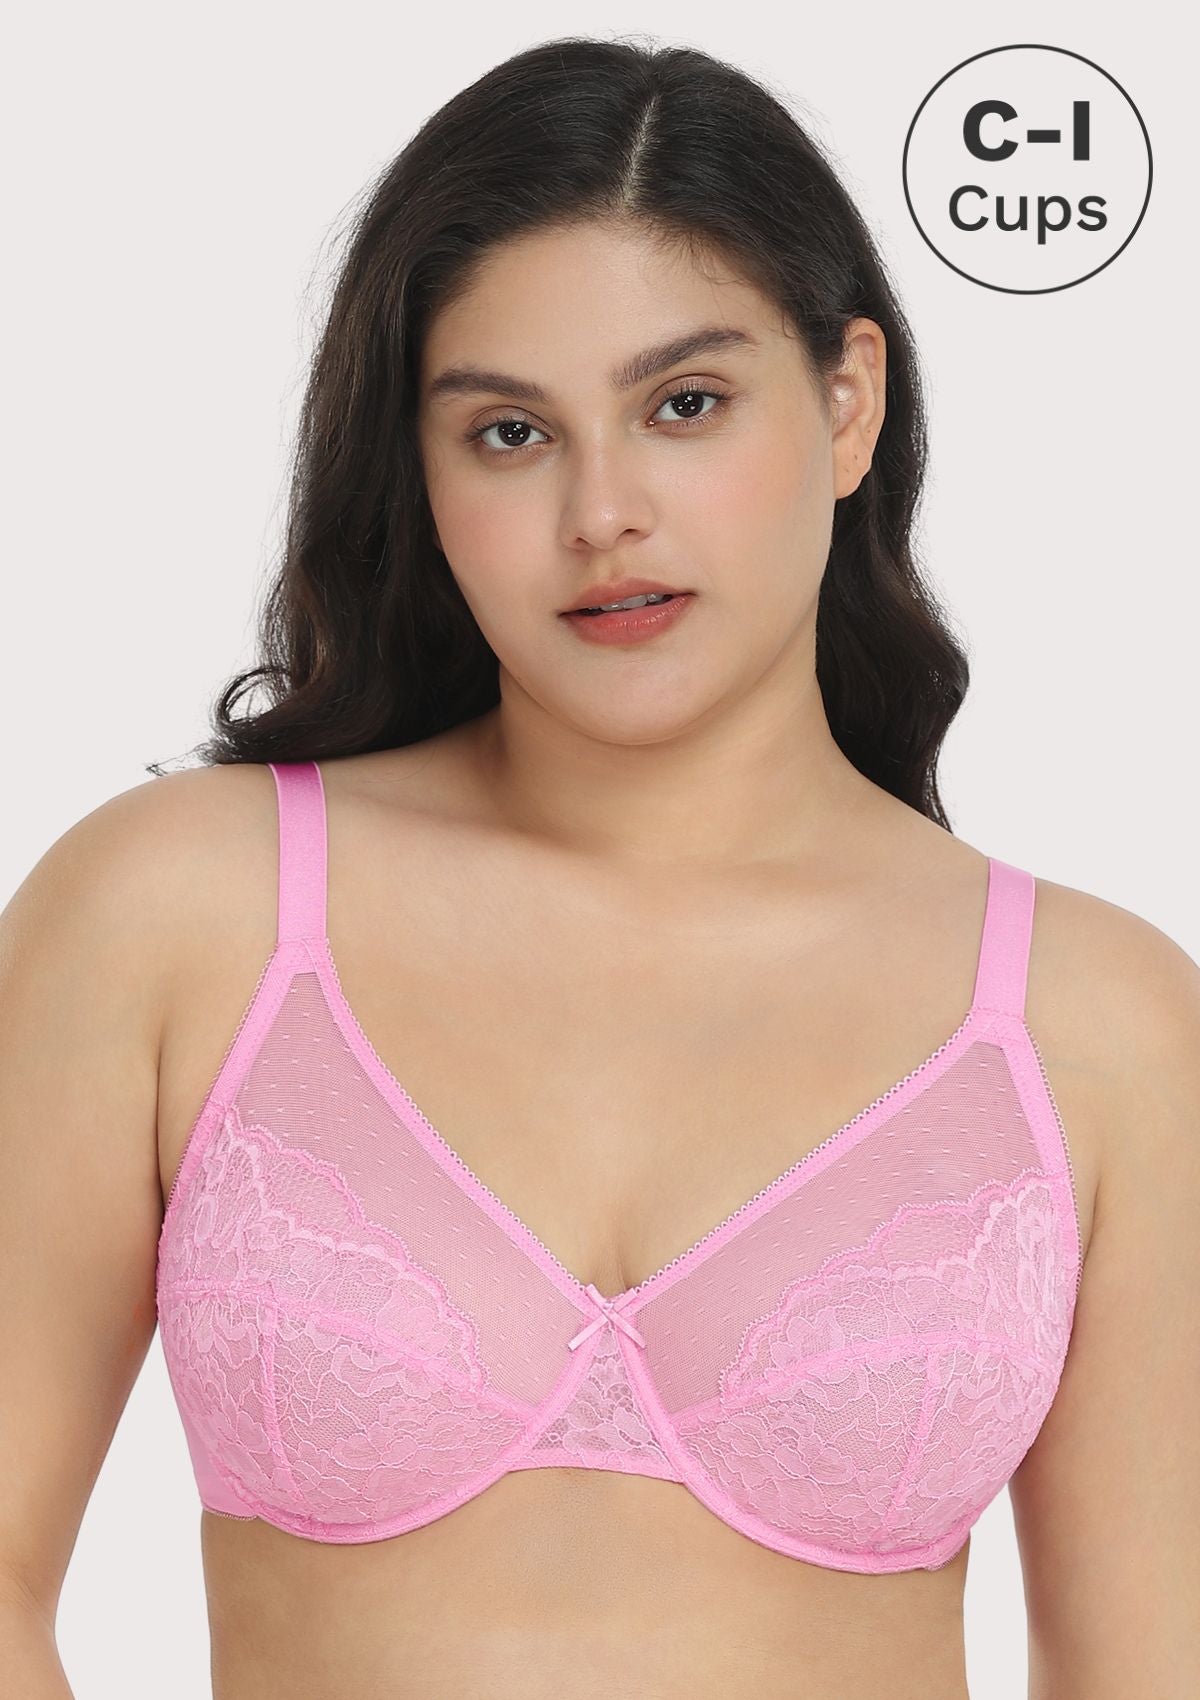 HSIA Enchante Lacy Bra: Comfy Sheer Lace Bra With Lift - Dusty Peach / 42 / C